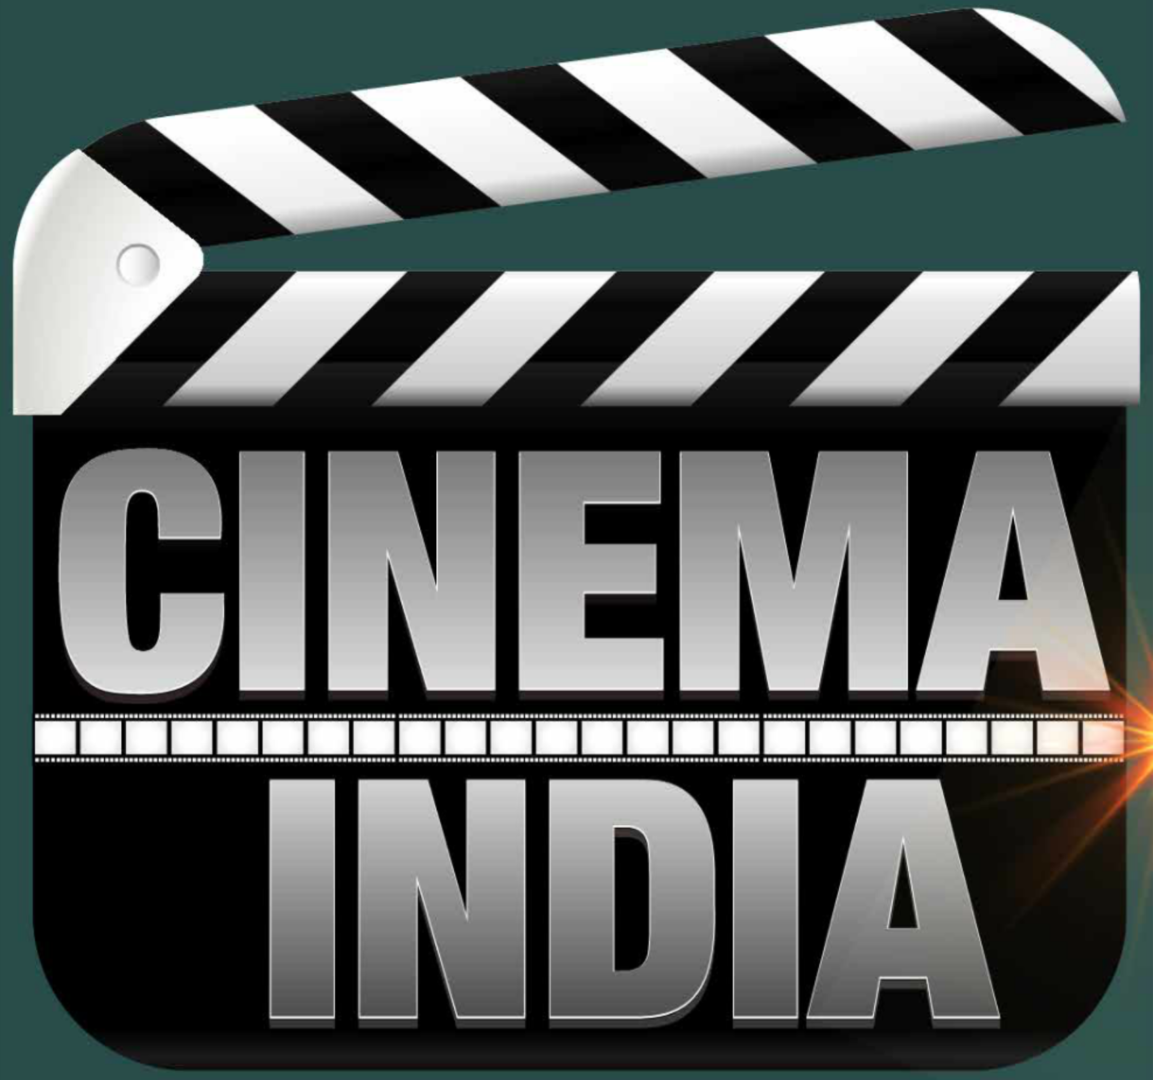 movie review channel name ideas hindi